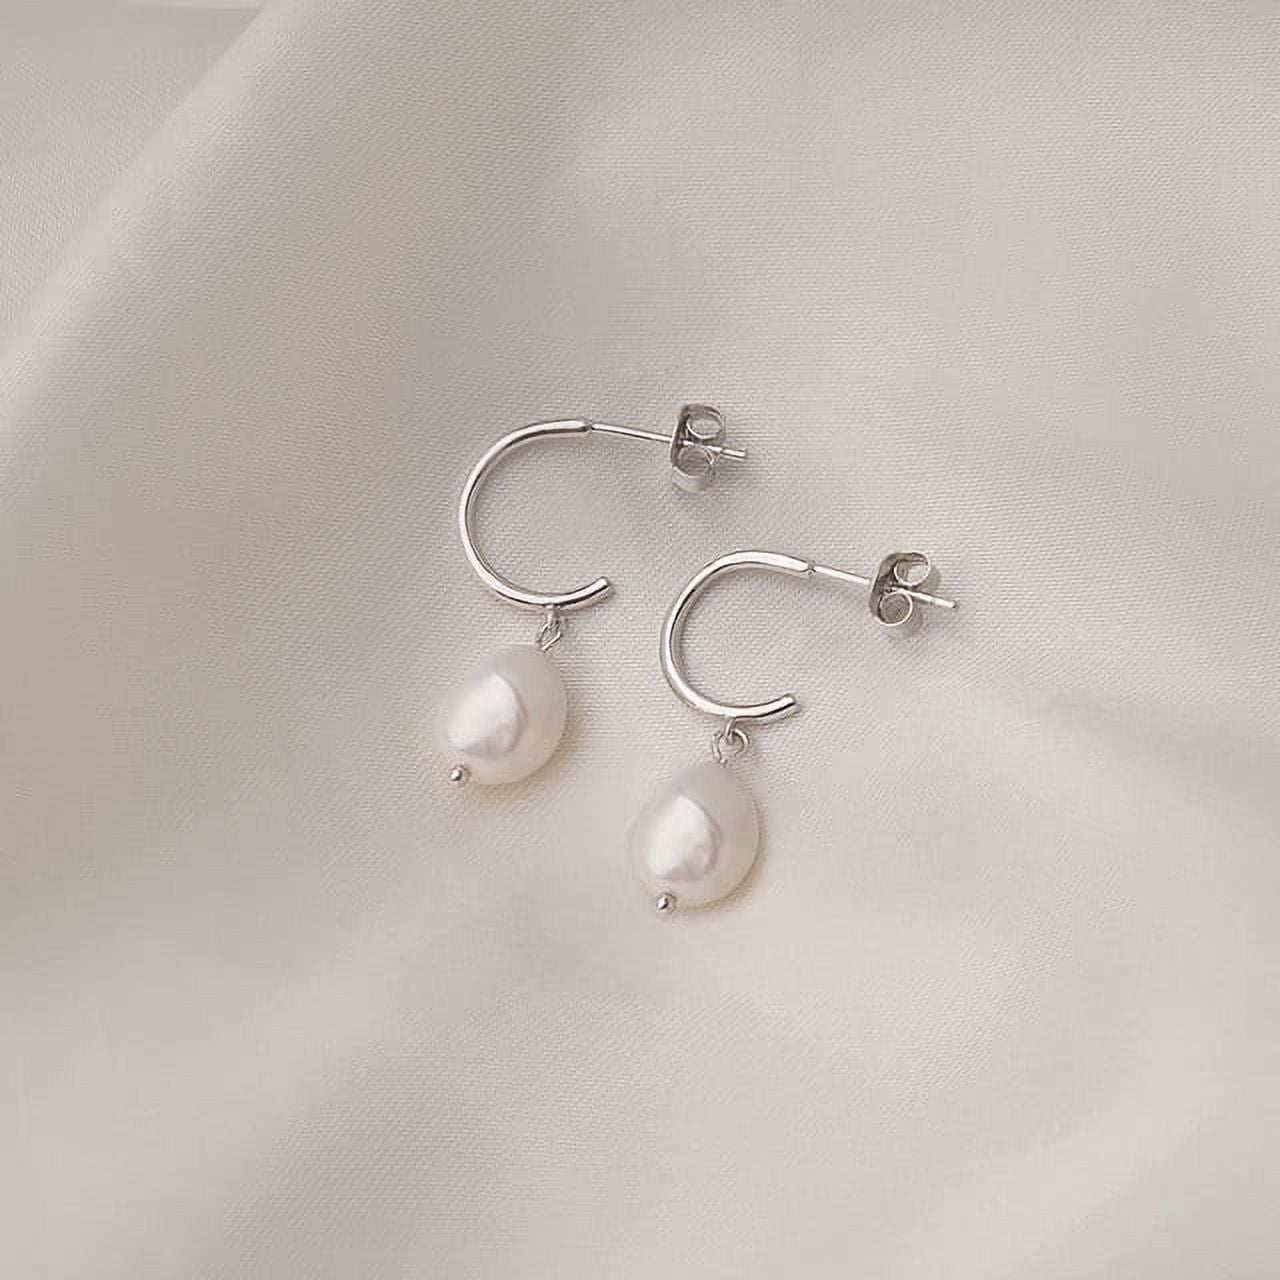 Pearl Hoop Earrings - Pearl Earrings - Pearl Hoop Earrings Sterling Silver  - Bridesmaid Jewelry - Bridesmaids Gift - Valentines Day Gift For Her